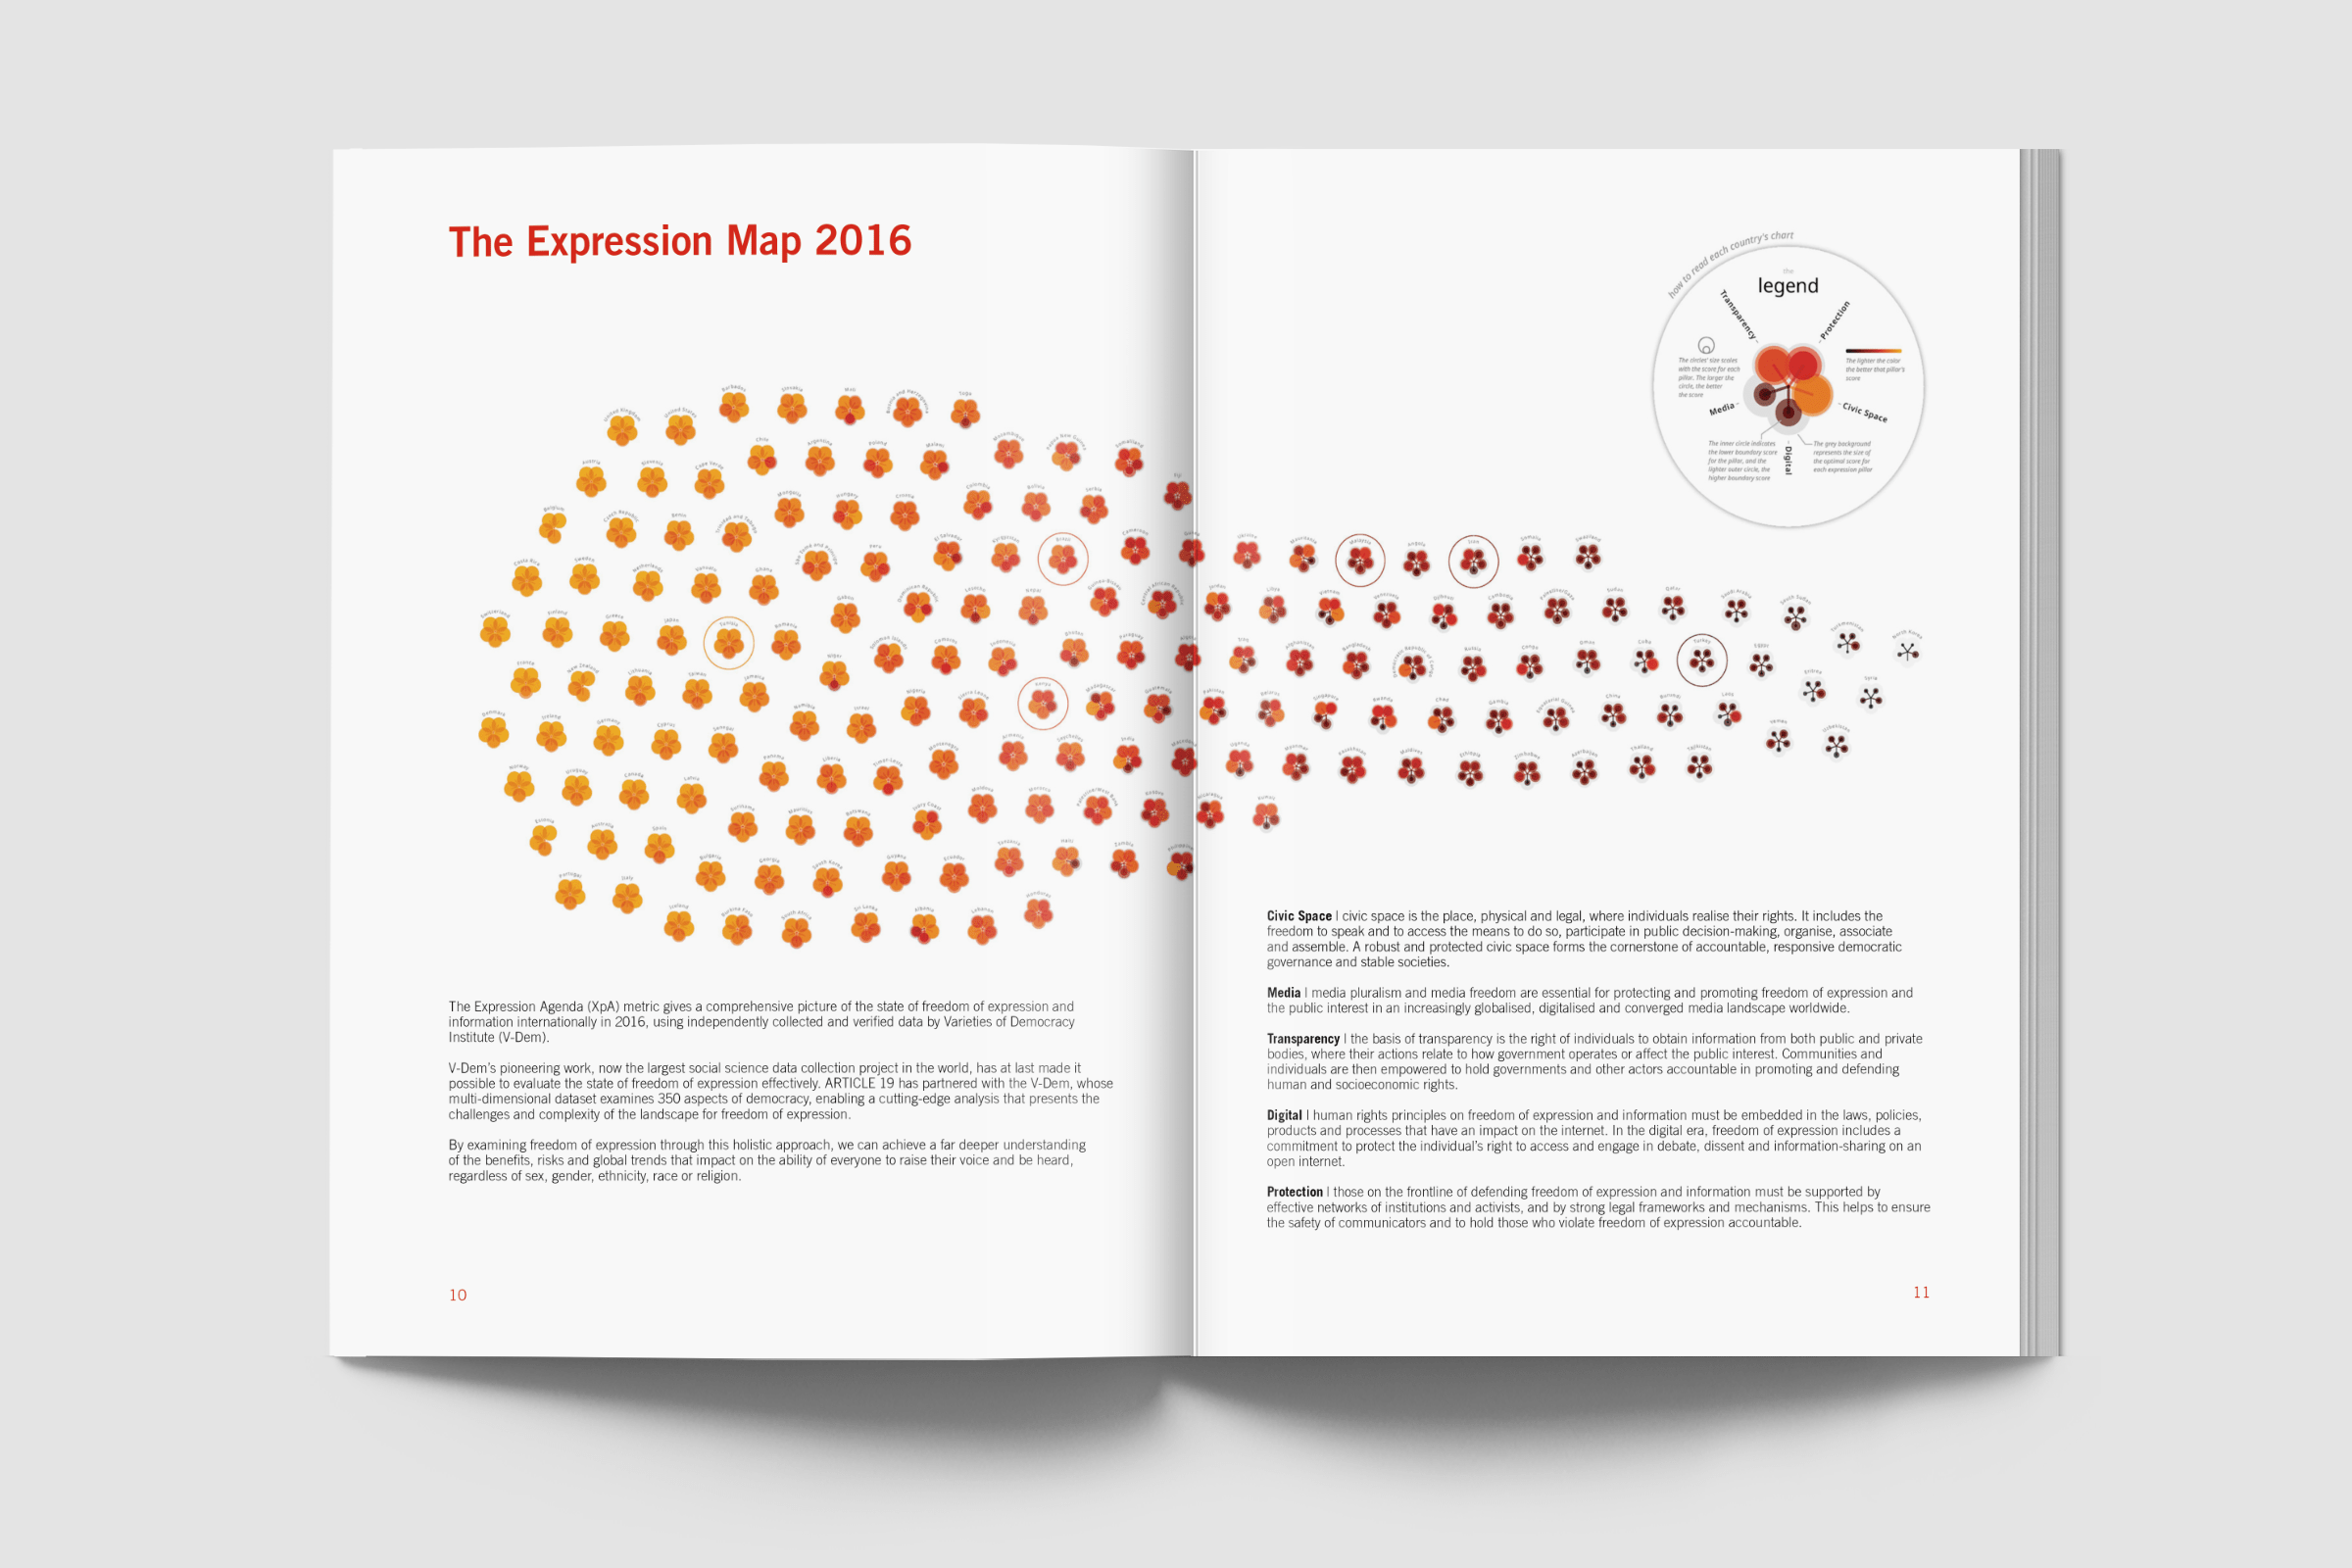 The Expression Agenda Report itself with the full visual spread across two pages